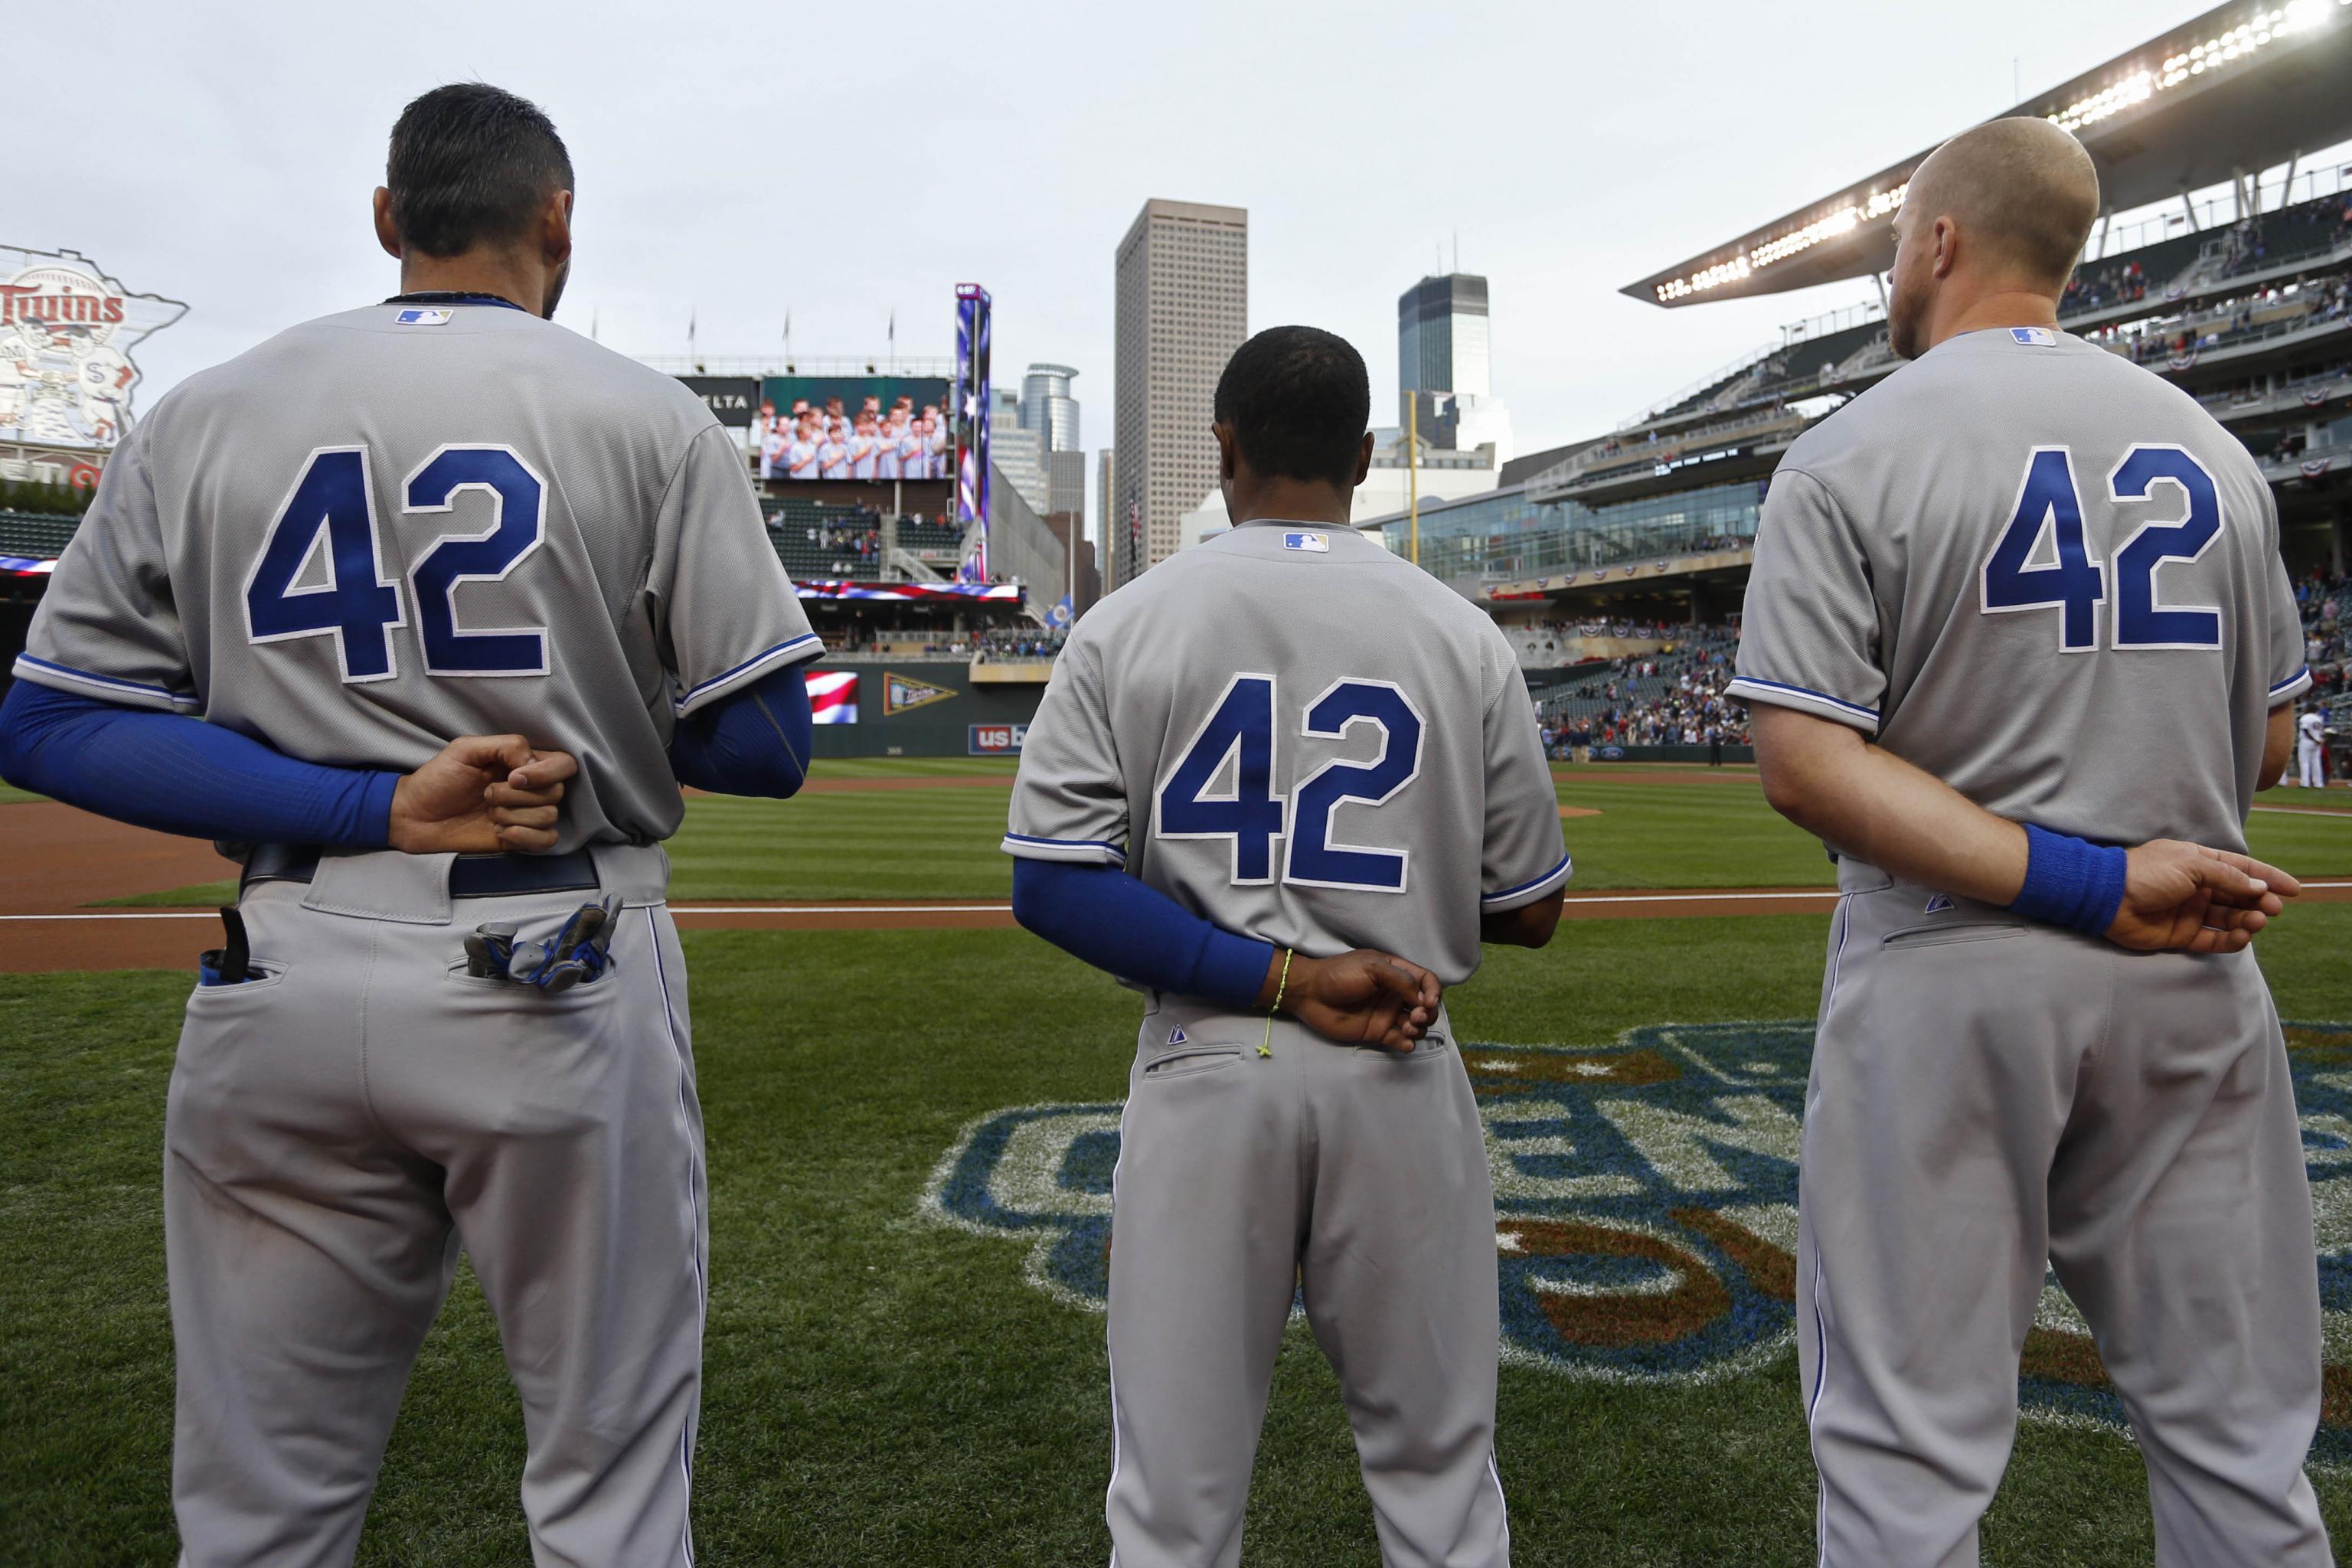 Yankees stars reflect on the significance of Jackie Robinson